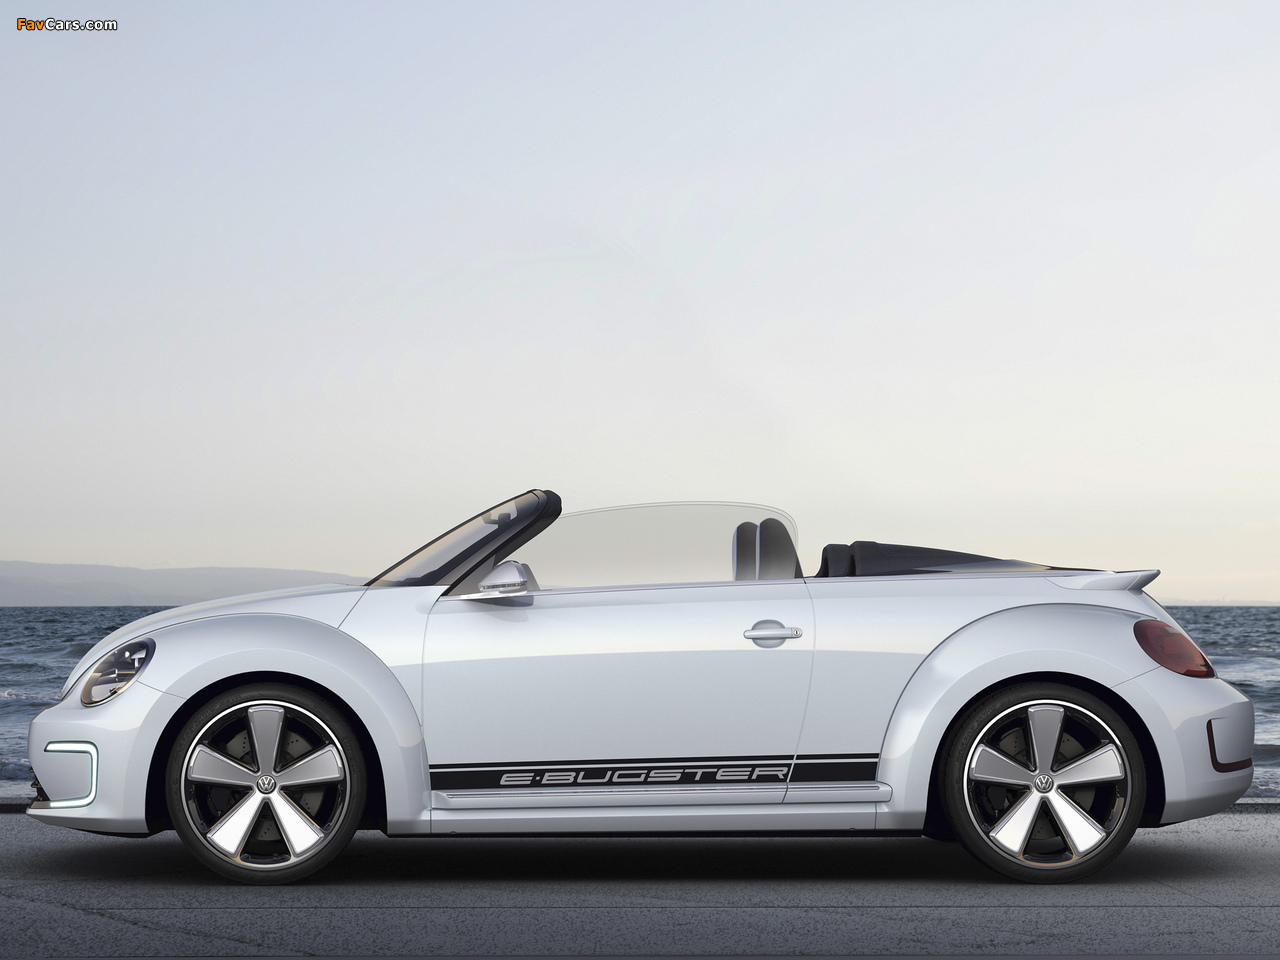 Volkswagen E-Bugster Concept 2012 pictures (1280 x 960)